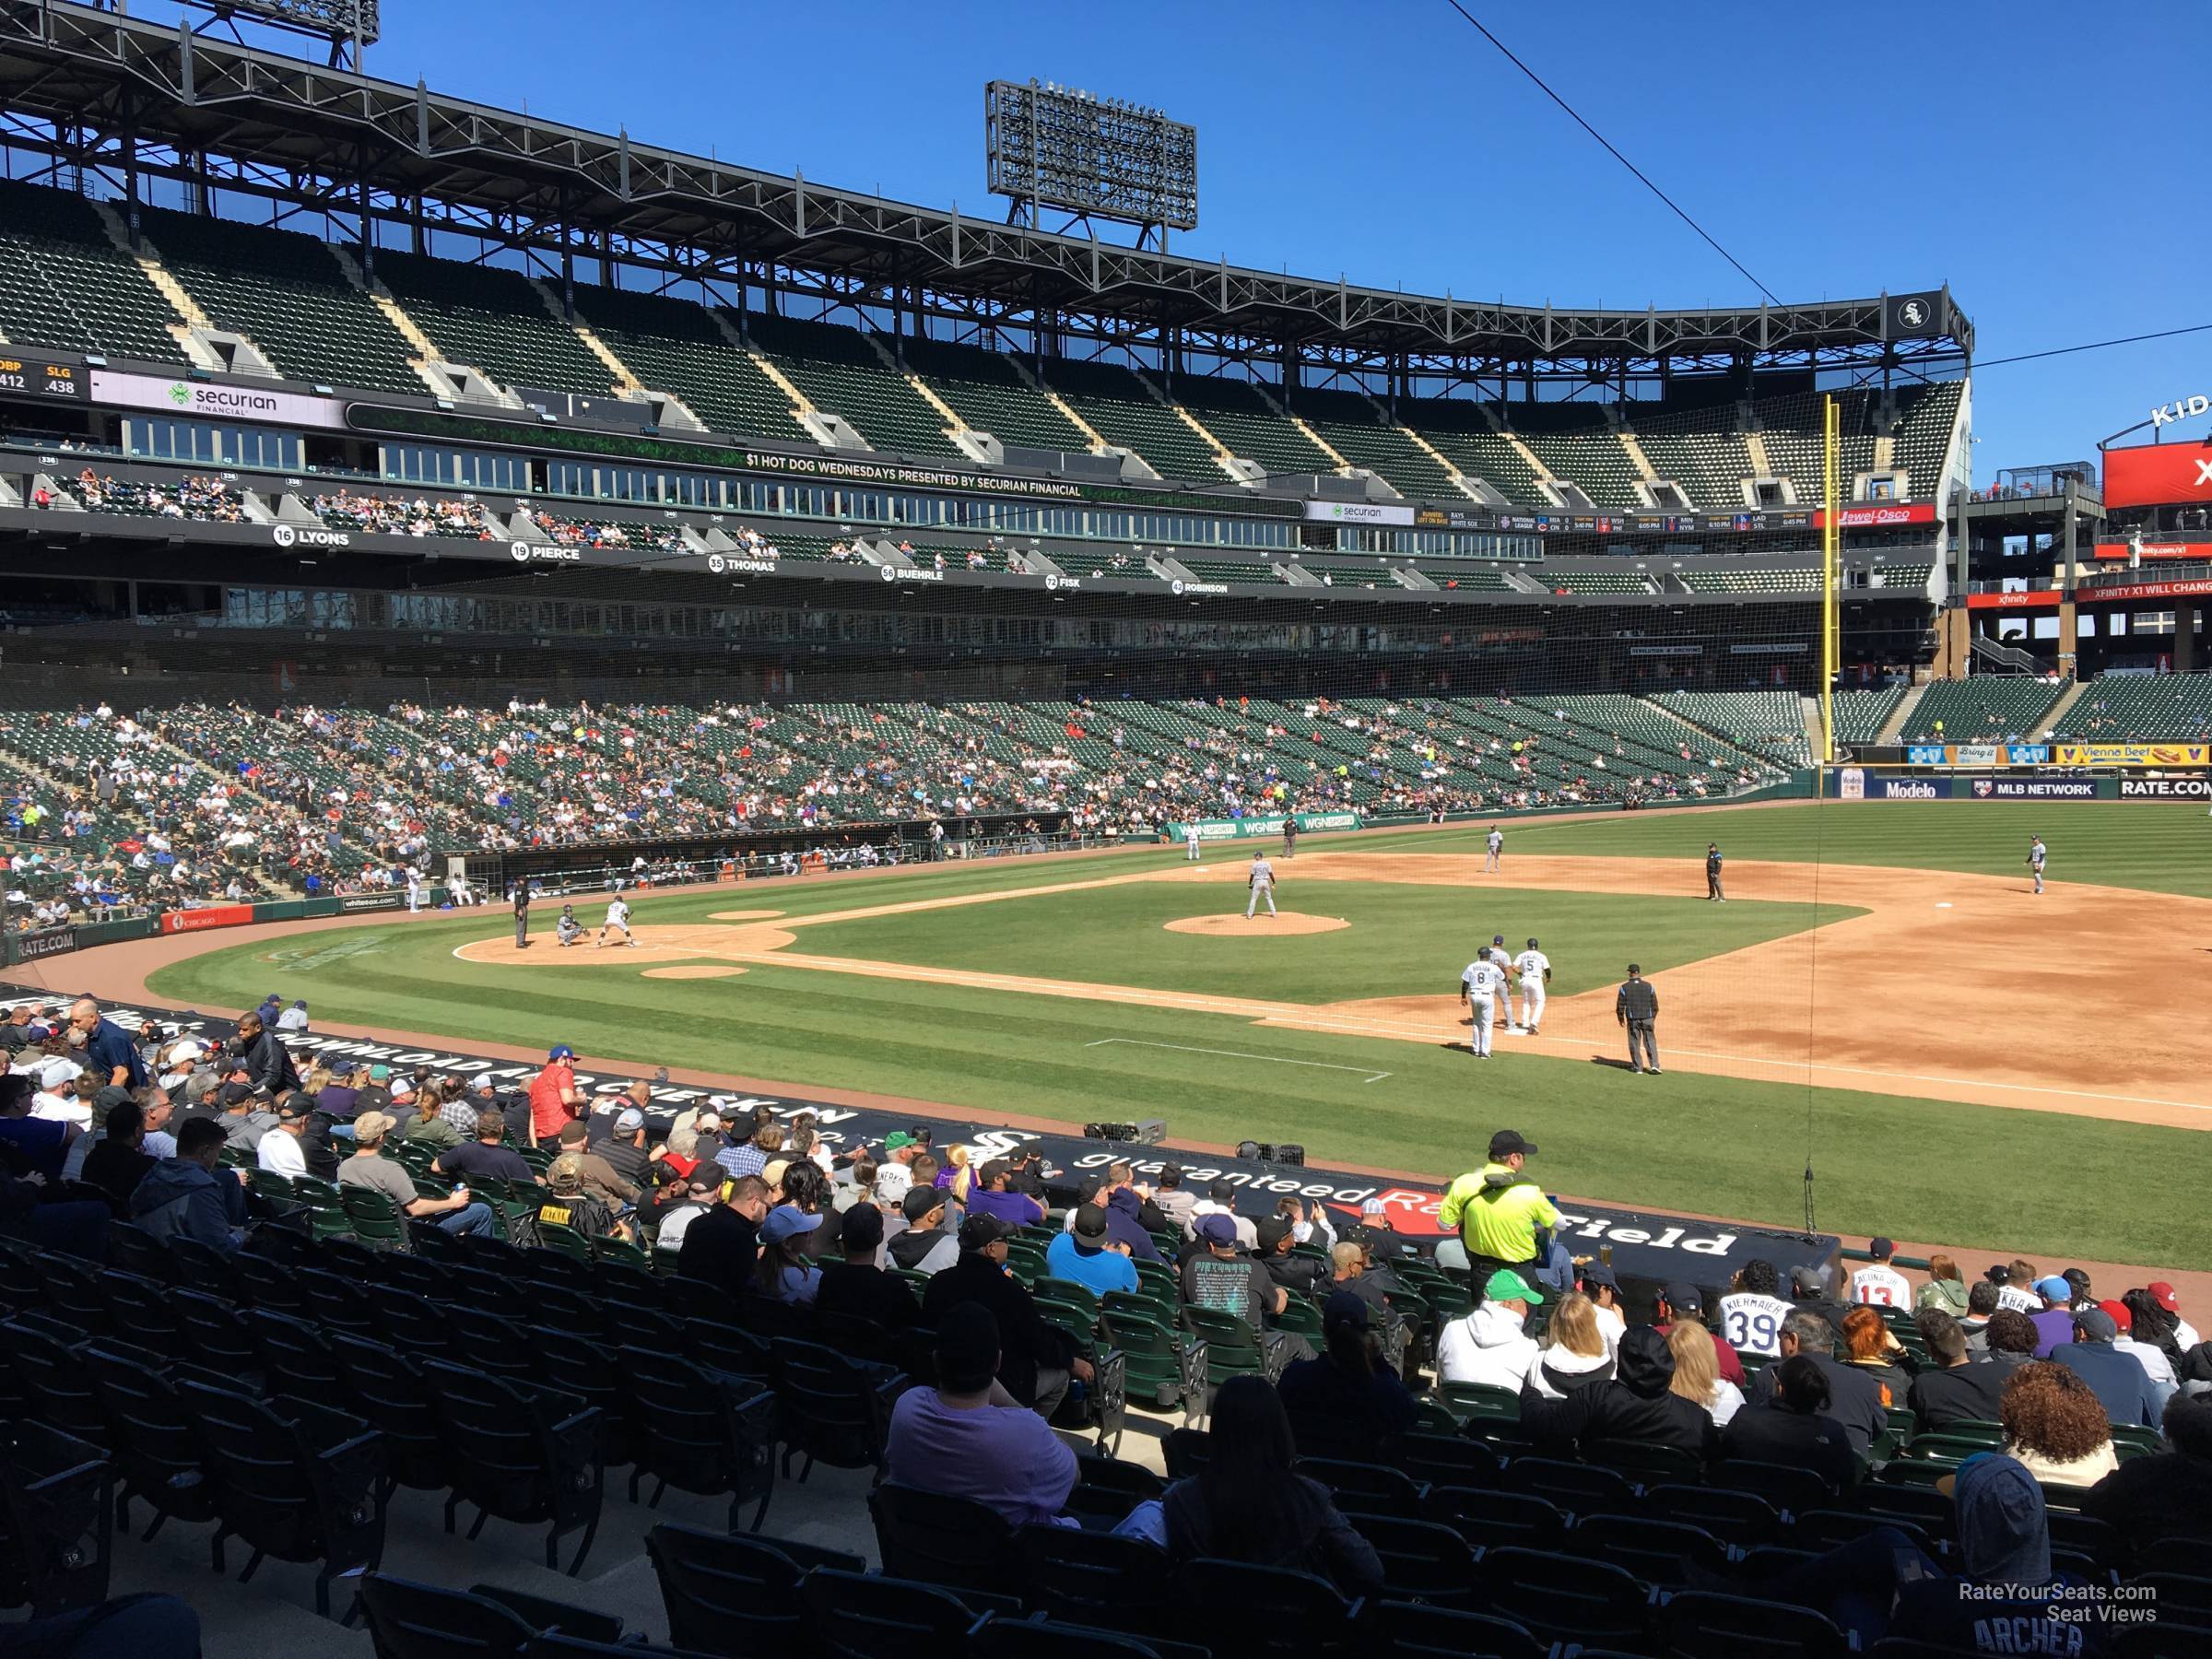 Section 121 at Guaranteed Rate Field 